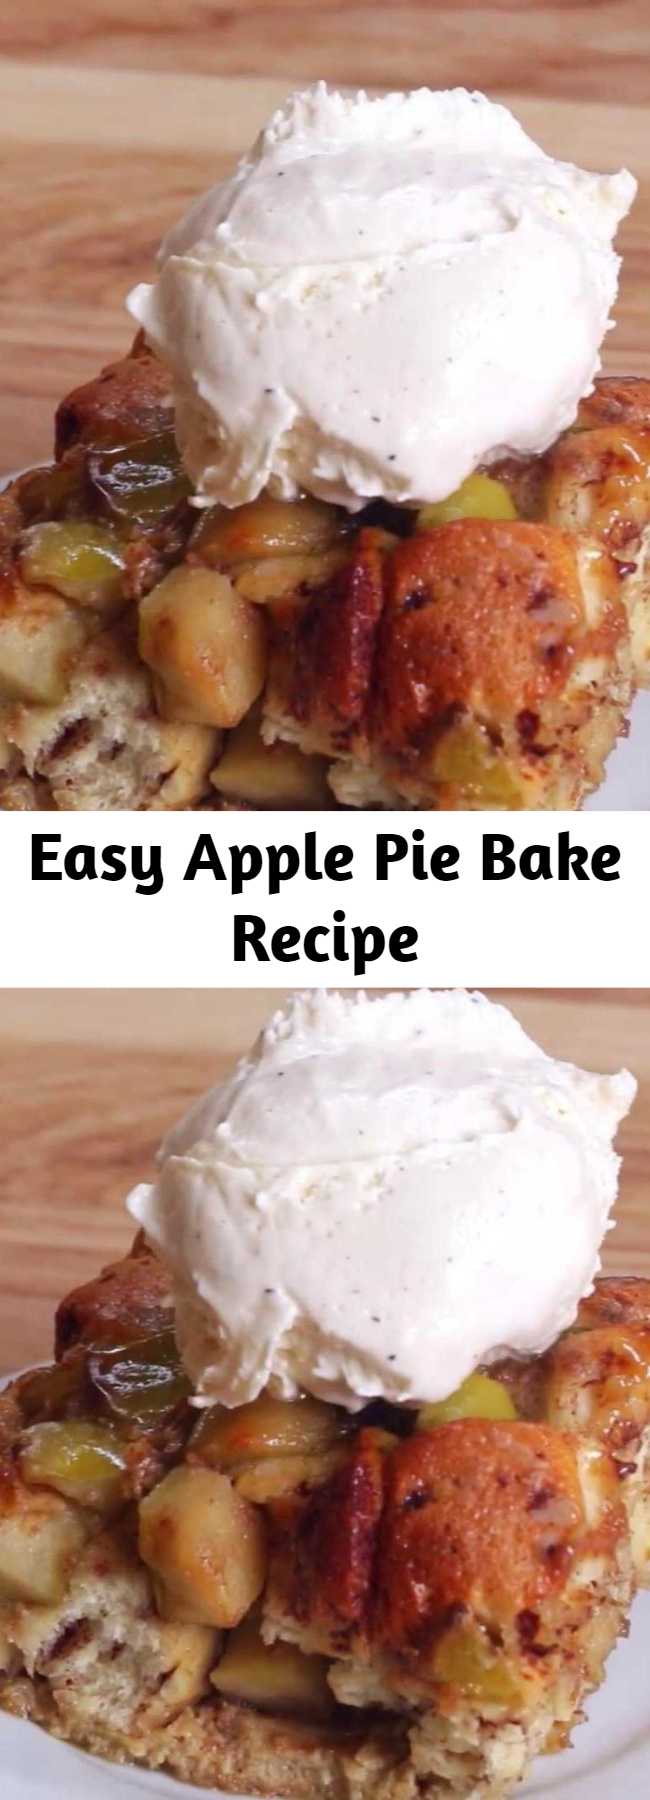 Easy Apple Pie Bake Recipe - This is absolutely the best apple pie bake you'll ever make! It has a flaky, buttery crust and a tender, lightly-spiced apple pie filling. Use a combination of apples for best flavor, and bake until the top is golden and the filling is bubbly!